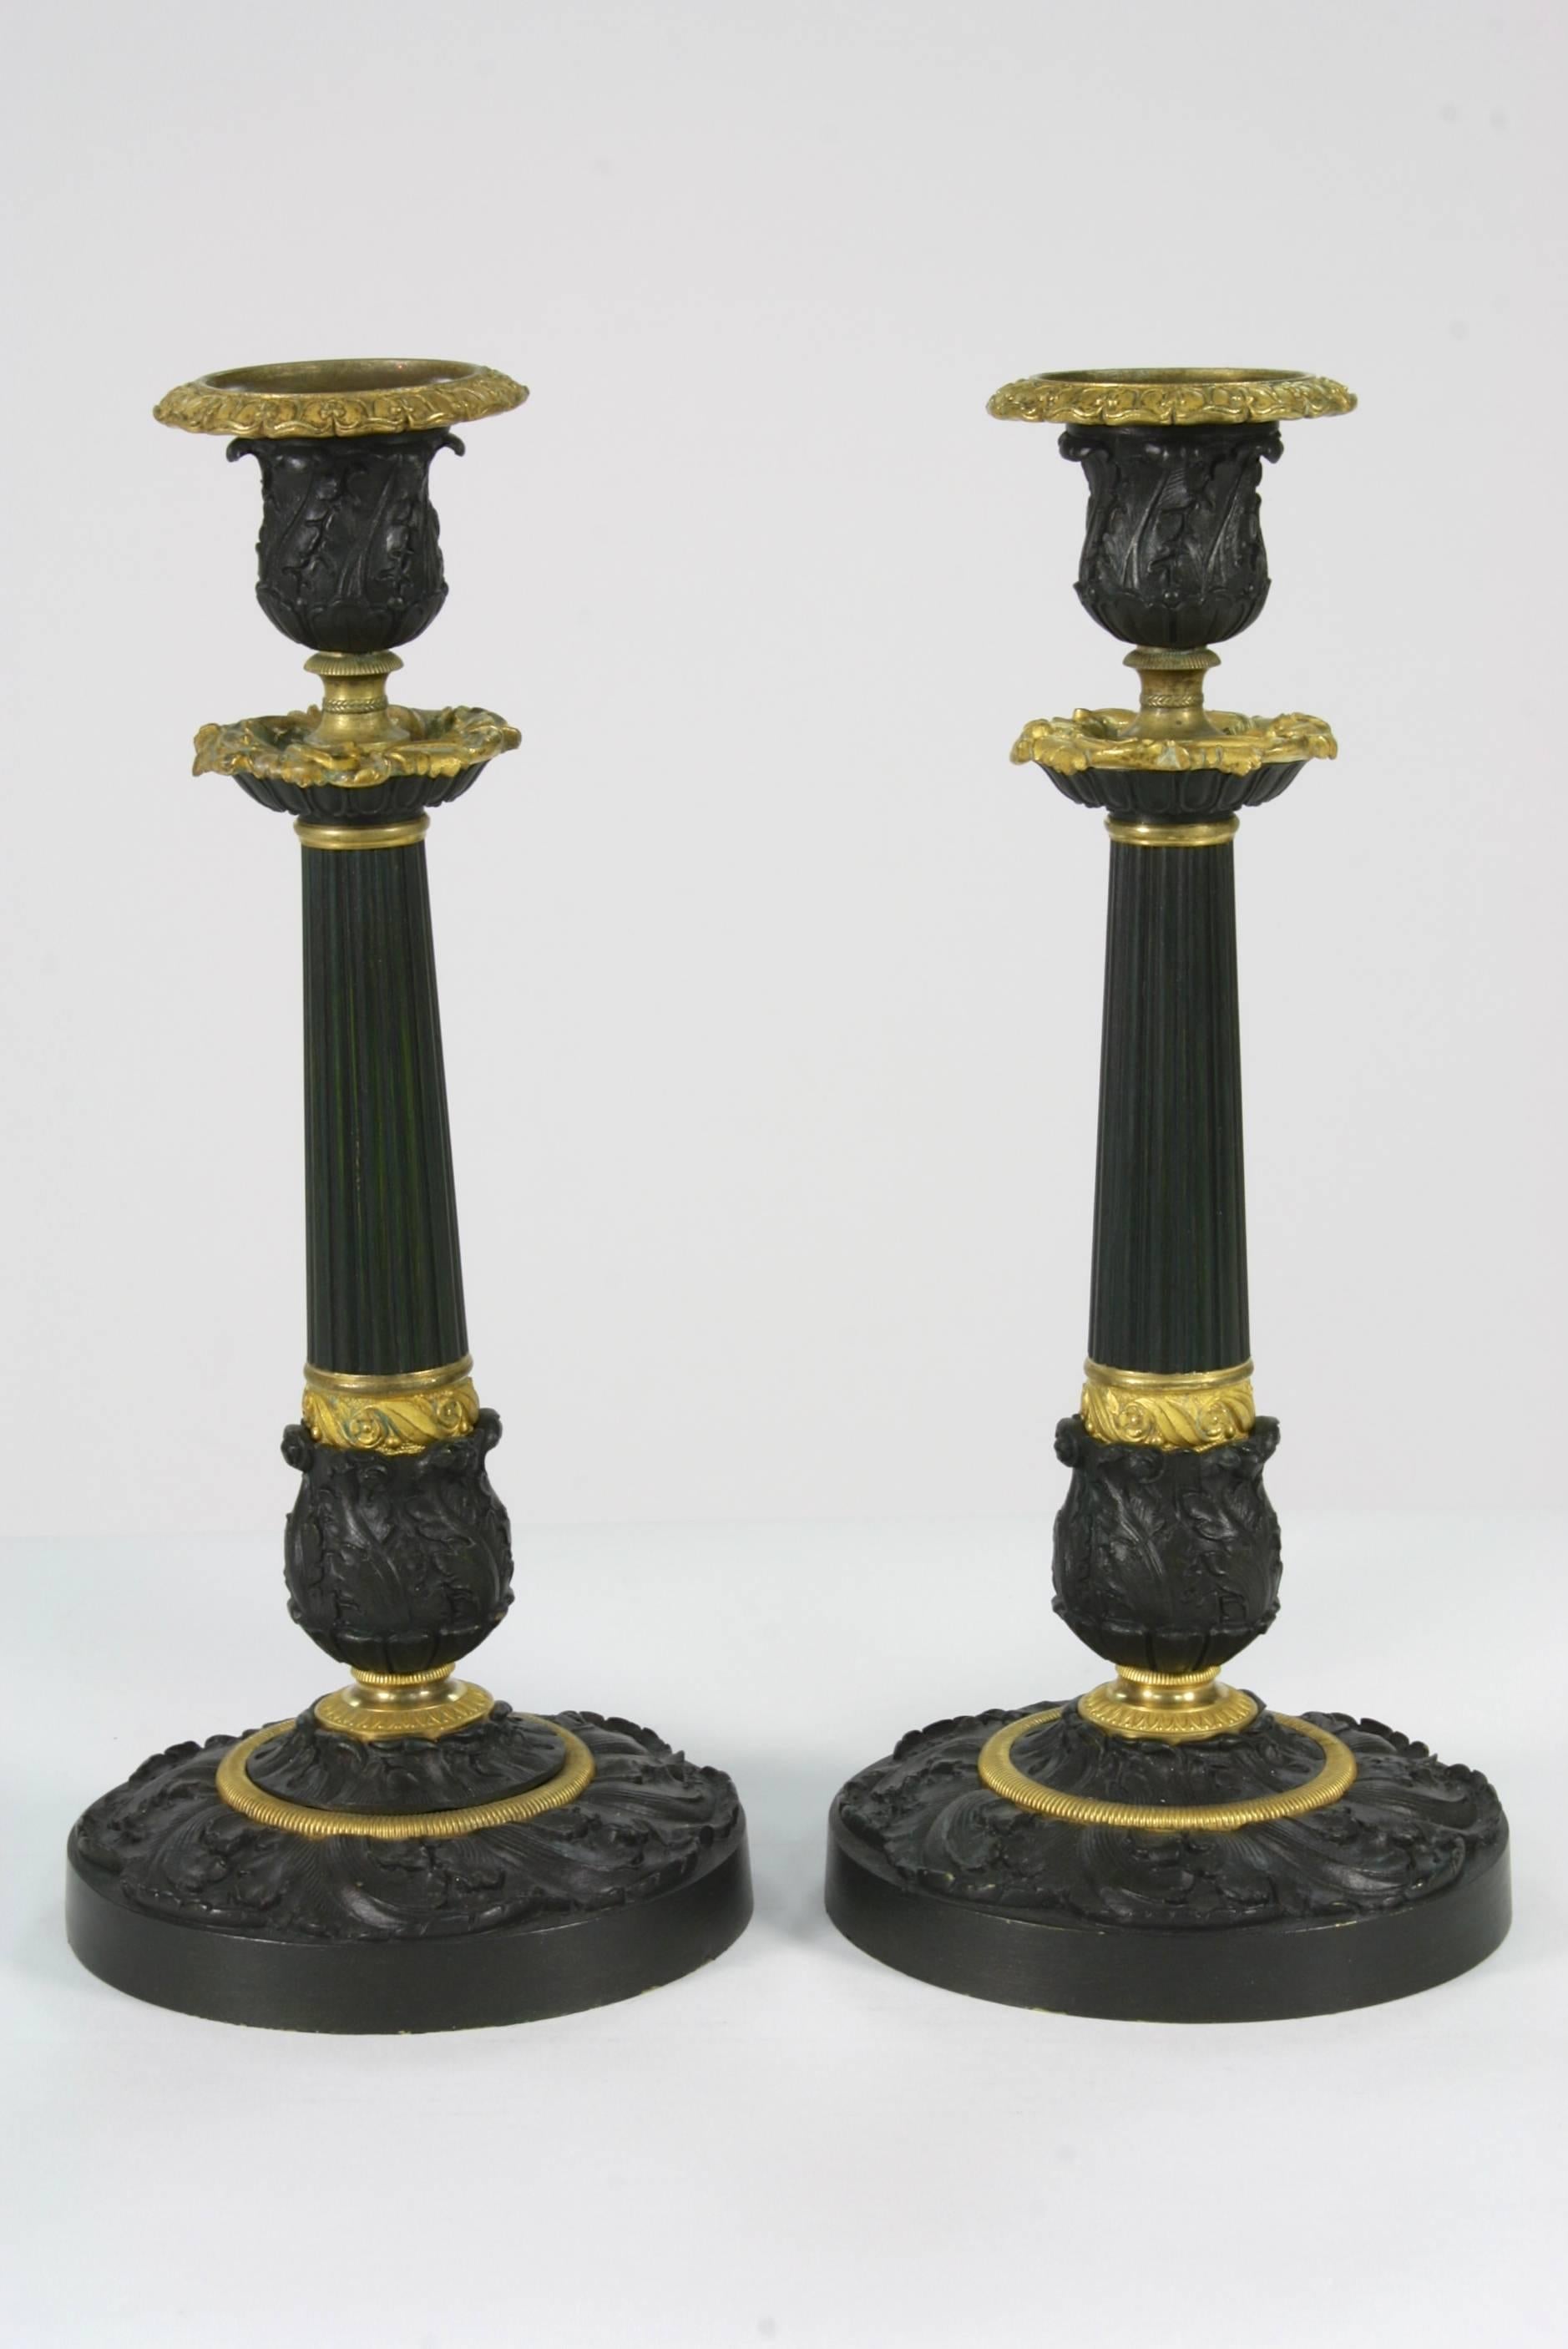 Pair of handsome 19th century French gilt bronze and patinated bronze candlesticks in the Restoration style. Could be electrified and made into table lamps.